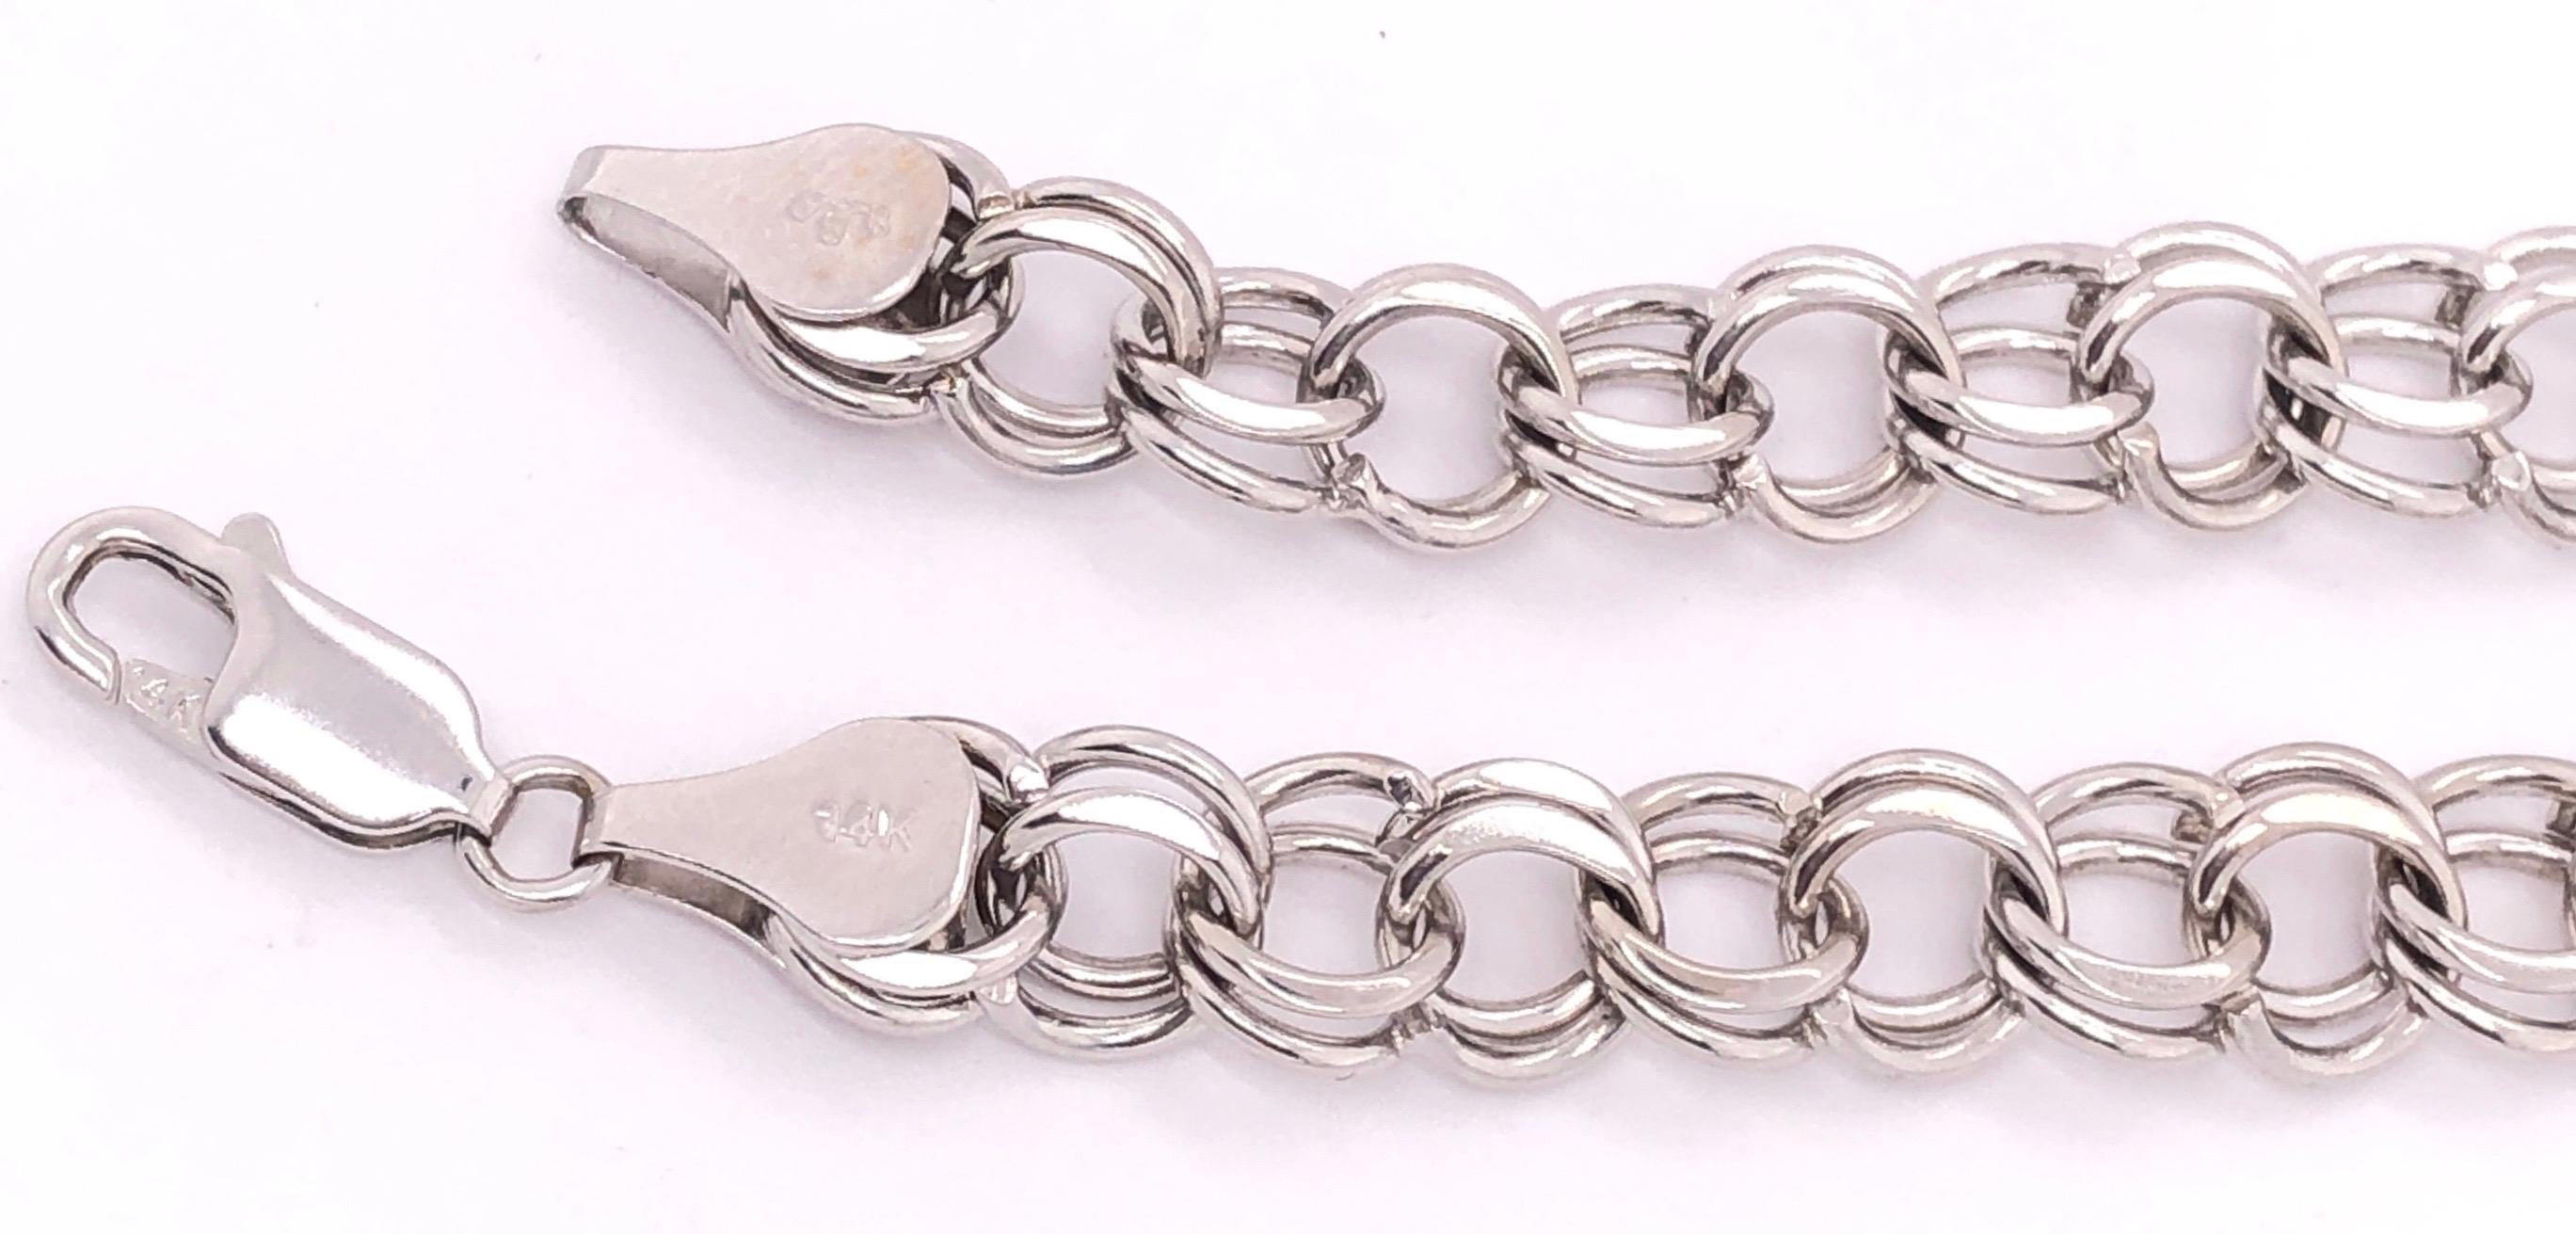 14 Karat White Gold Fancy Link Bracelet In Good Condition For Sale In Stamford, CT